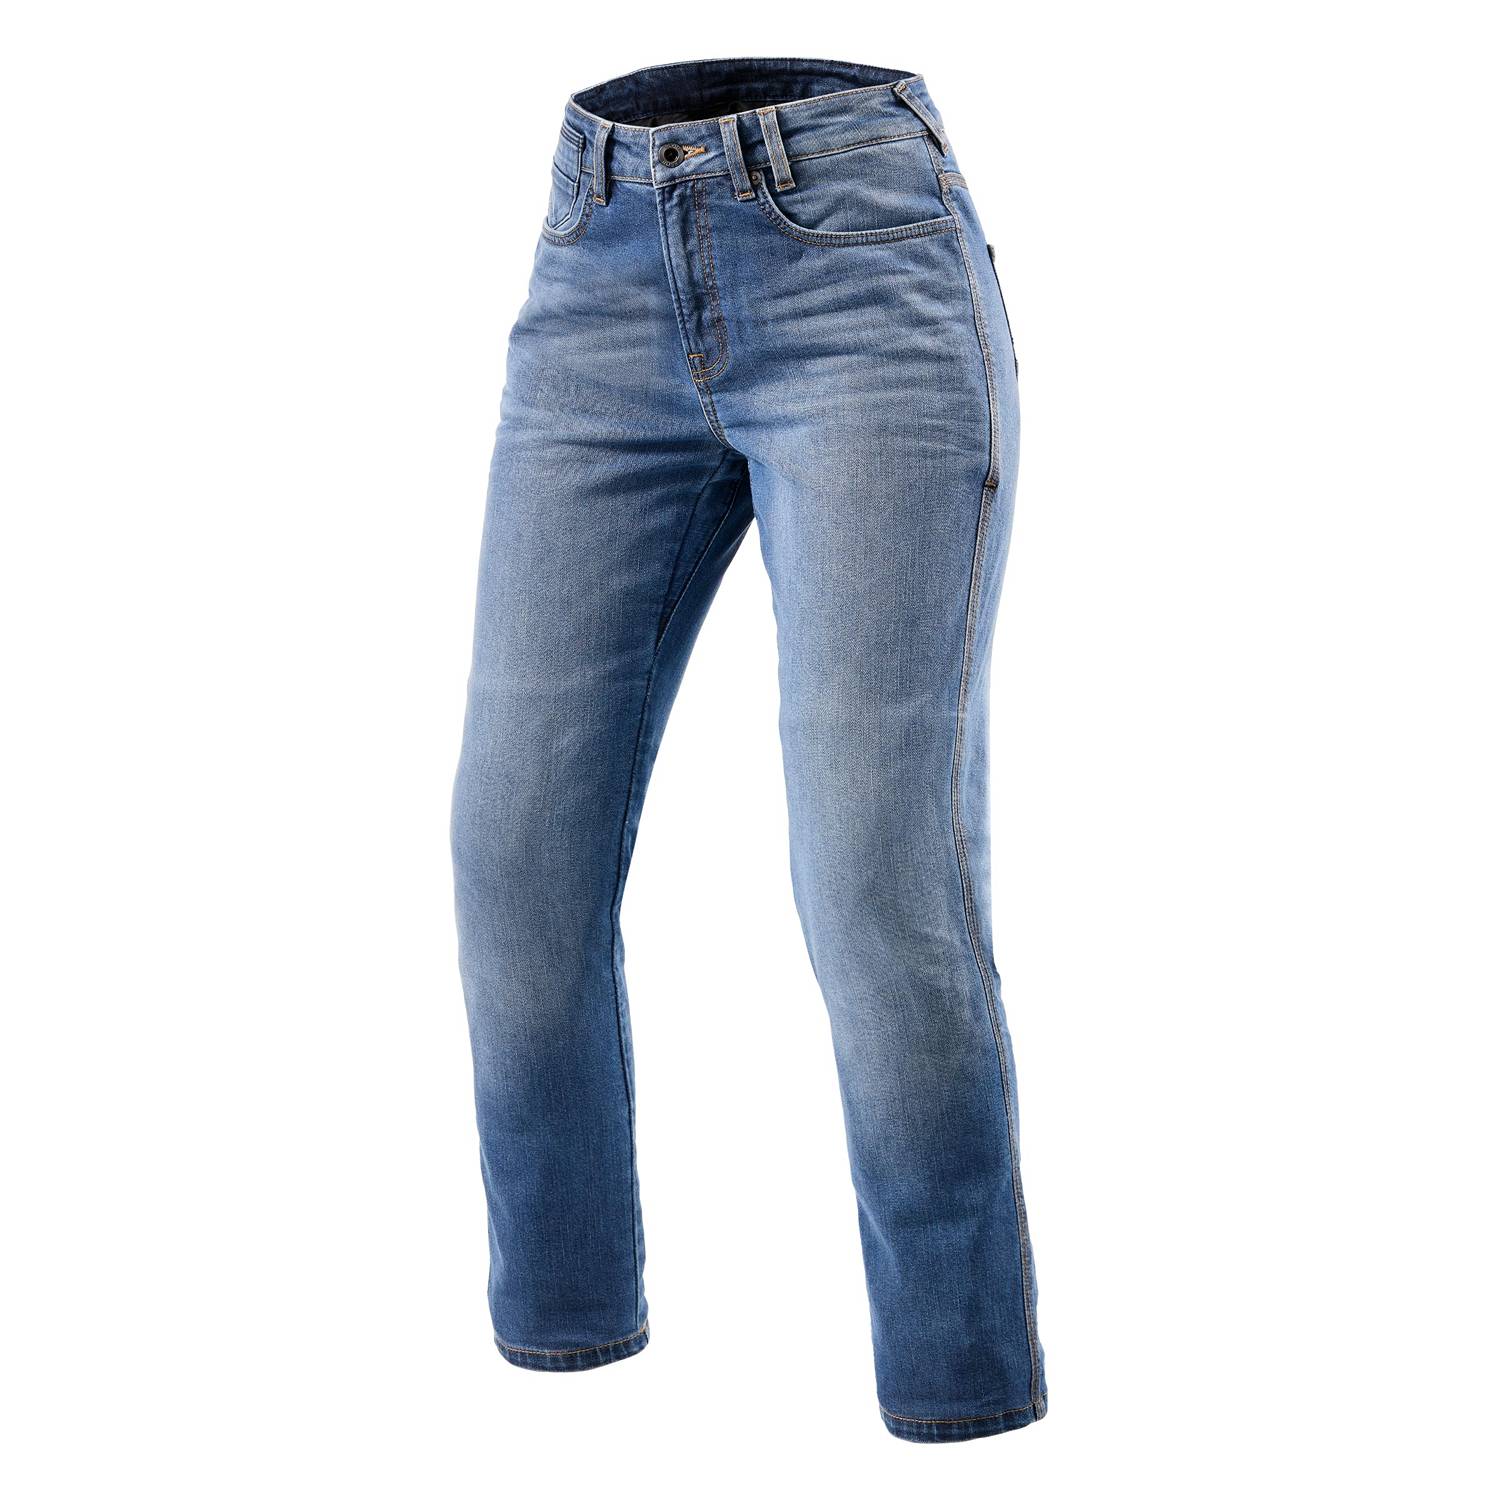 Image of REV'IT! Jeans Victoria 2 Ladies SF Classic Blue Used Motorcycle Jeans Size L32/W32 ID 8700001342865